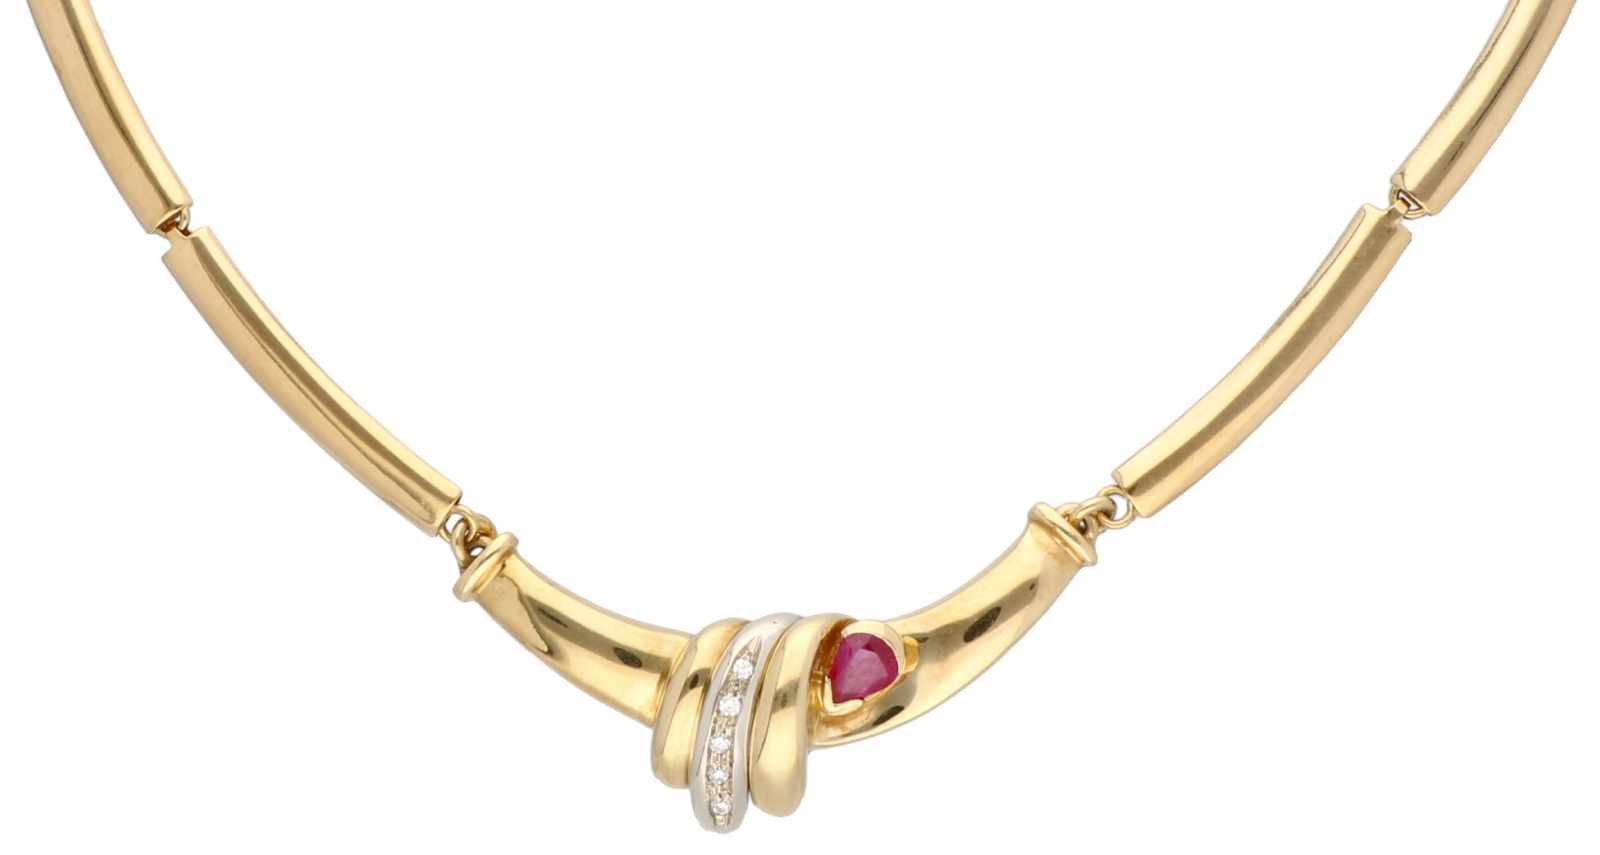 Necklace yellow gold, ca. 0.05 carat diamond and ruby - 18 ct.